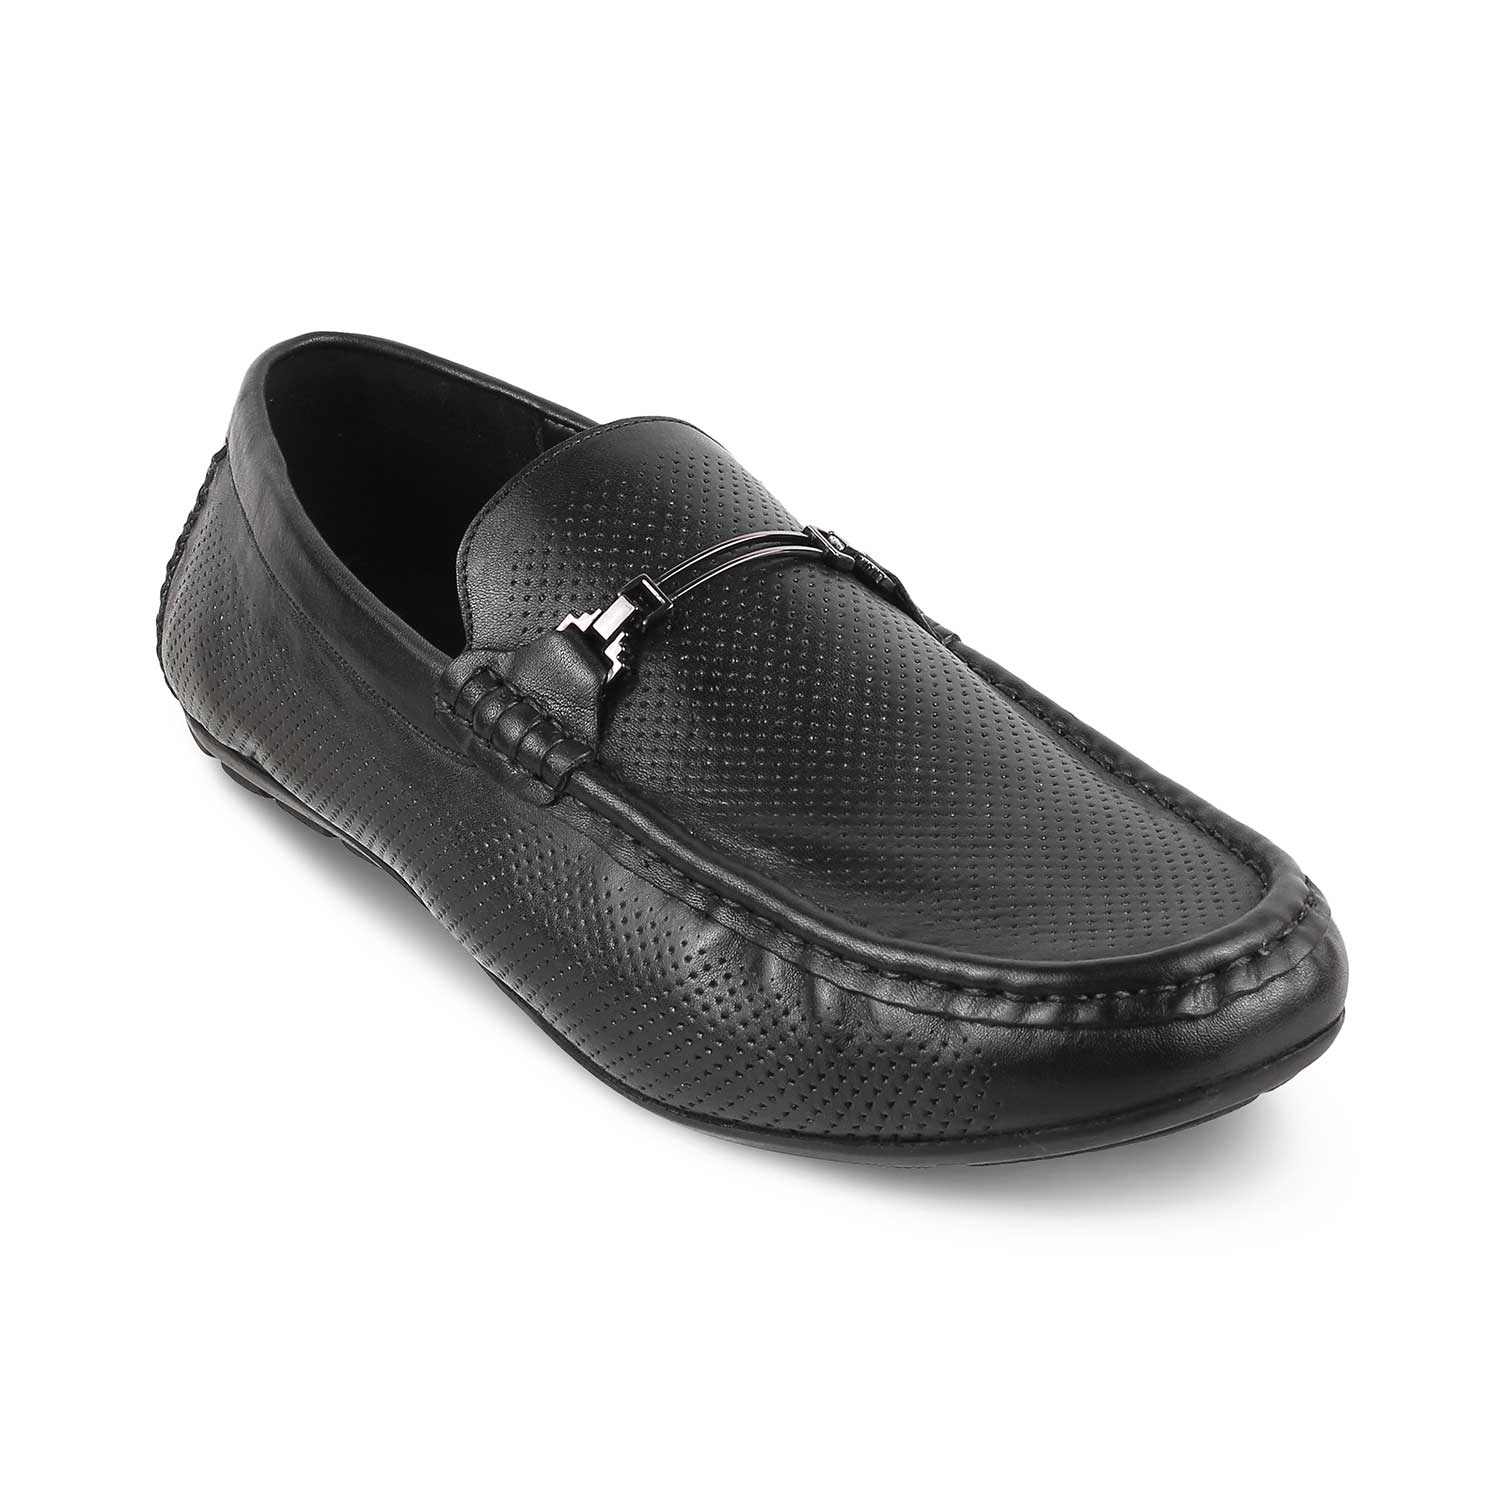 Tresmode-The Open-2 Black Men's Leather Loafers Tresmode-Tresmode